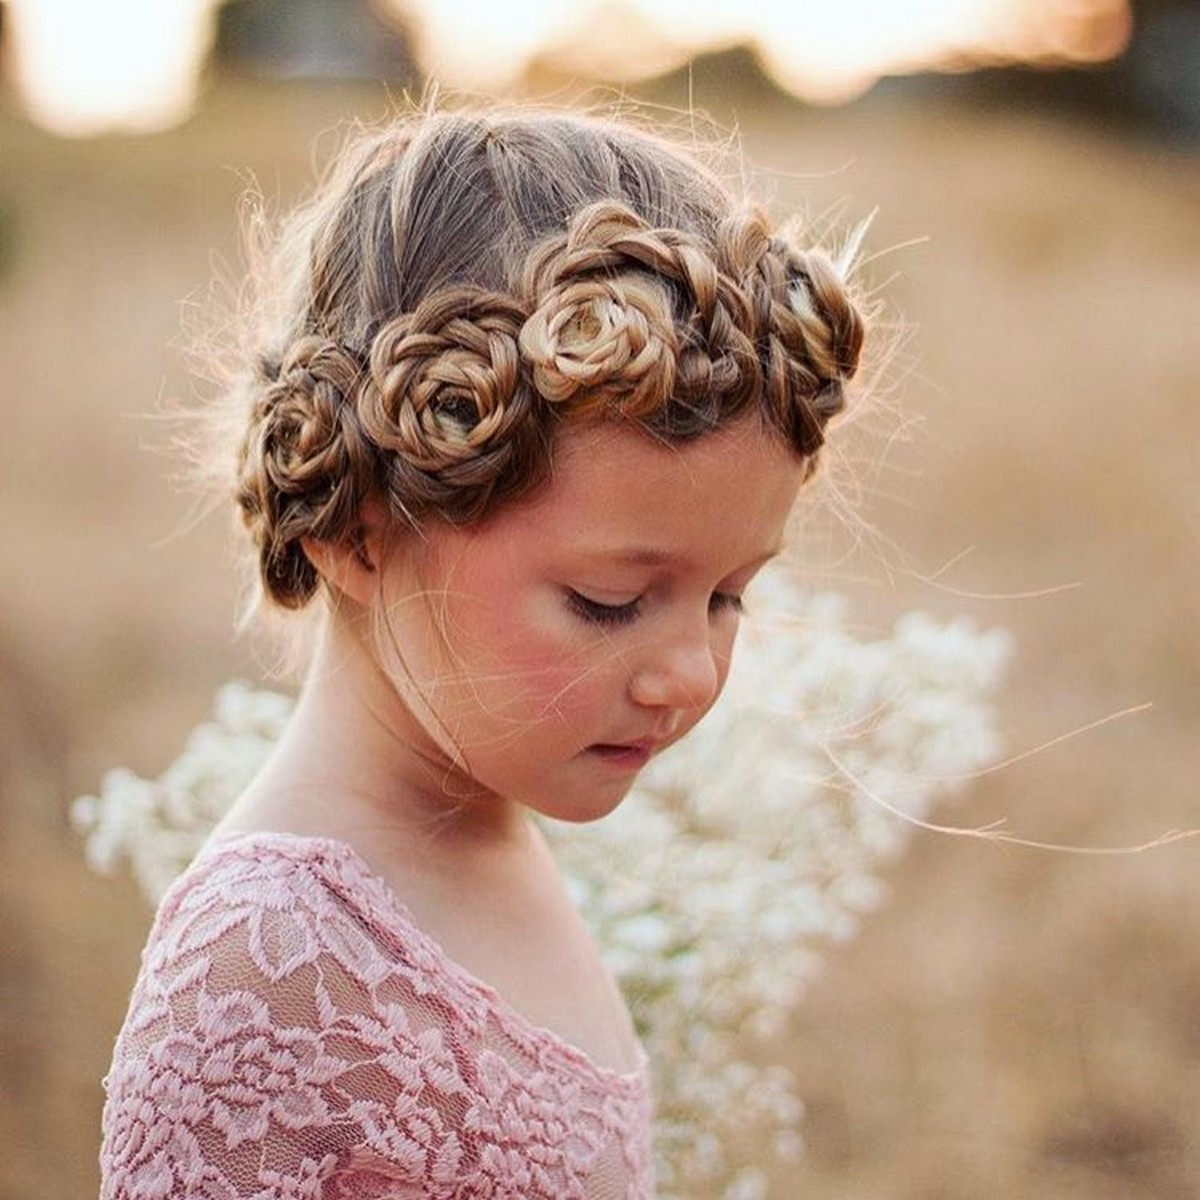 Flower Crown With Braided Updo